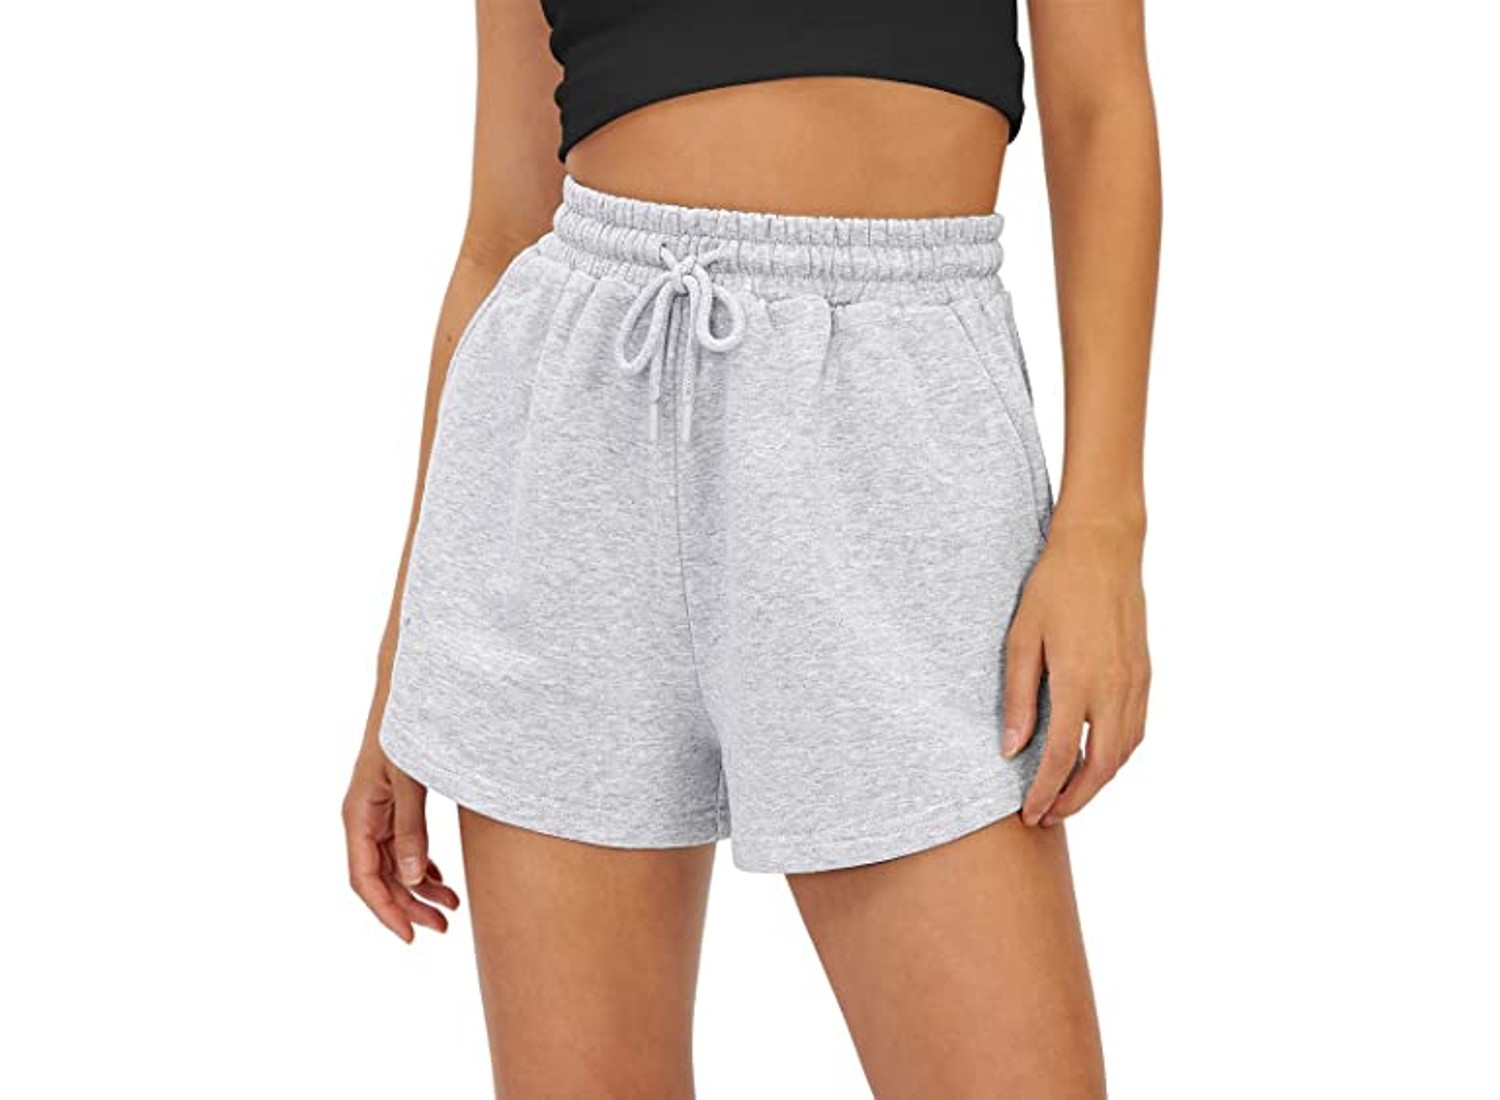 The sweat shorts that give you Kendall Jenner's iconic look. (Source: Amazon)